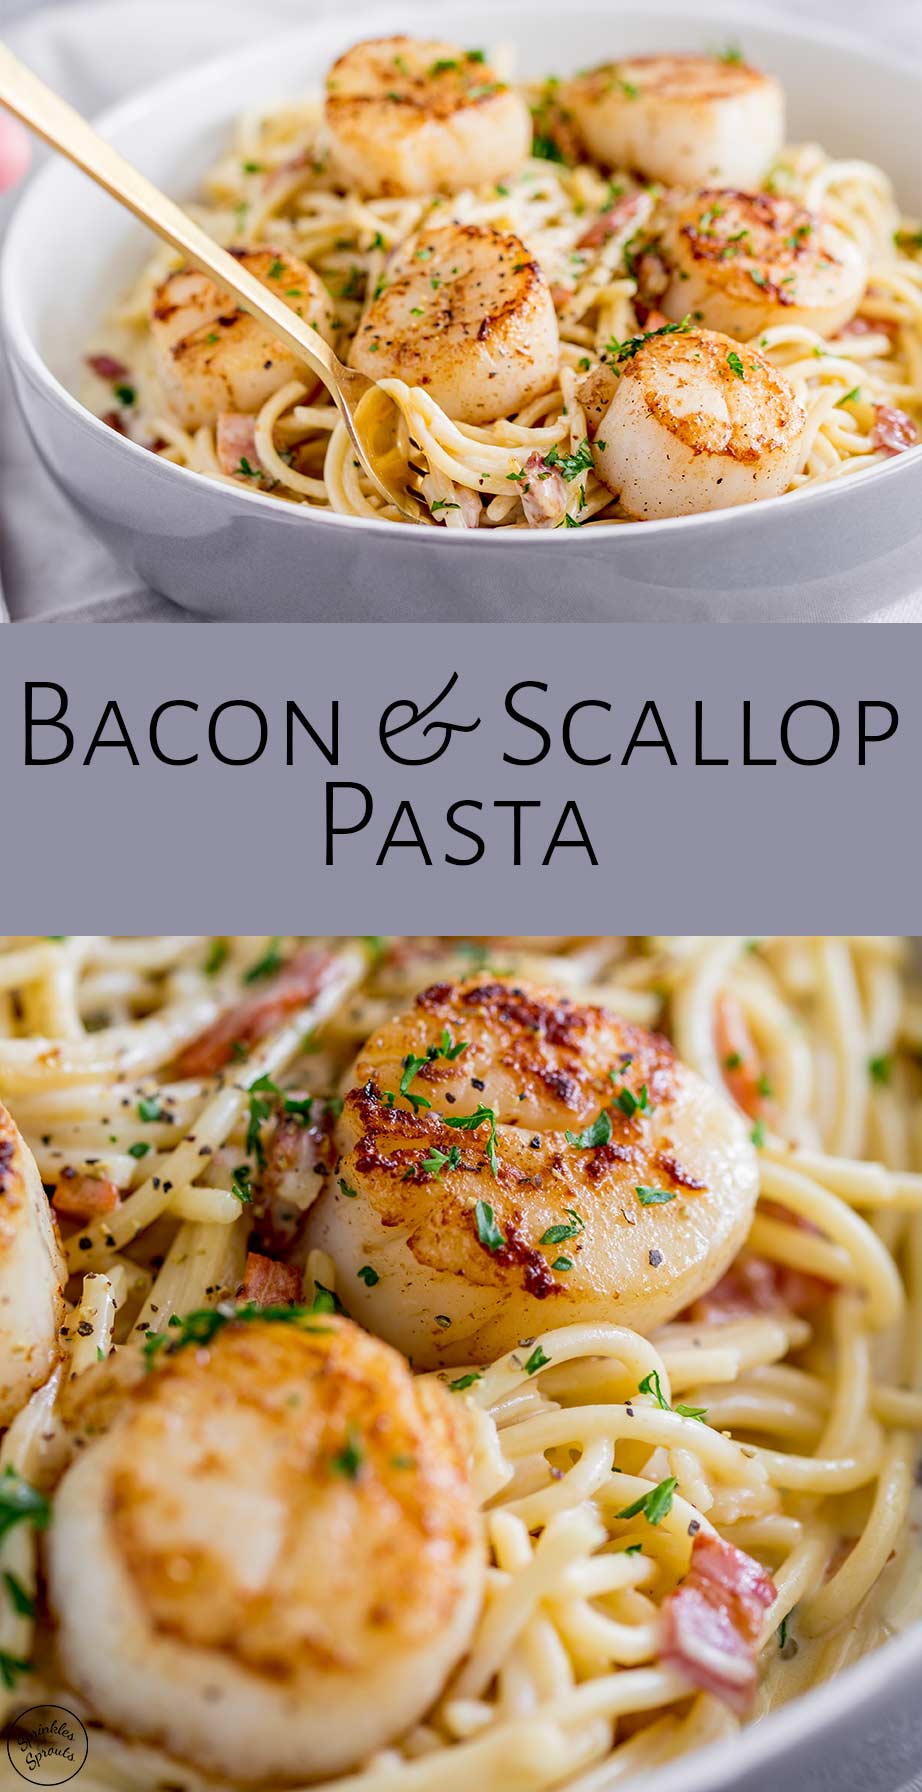 two pictures of scallop pasta with text in the middle